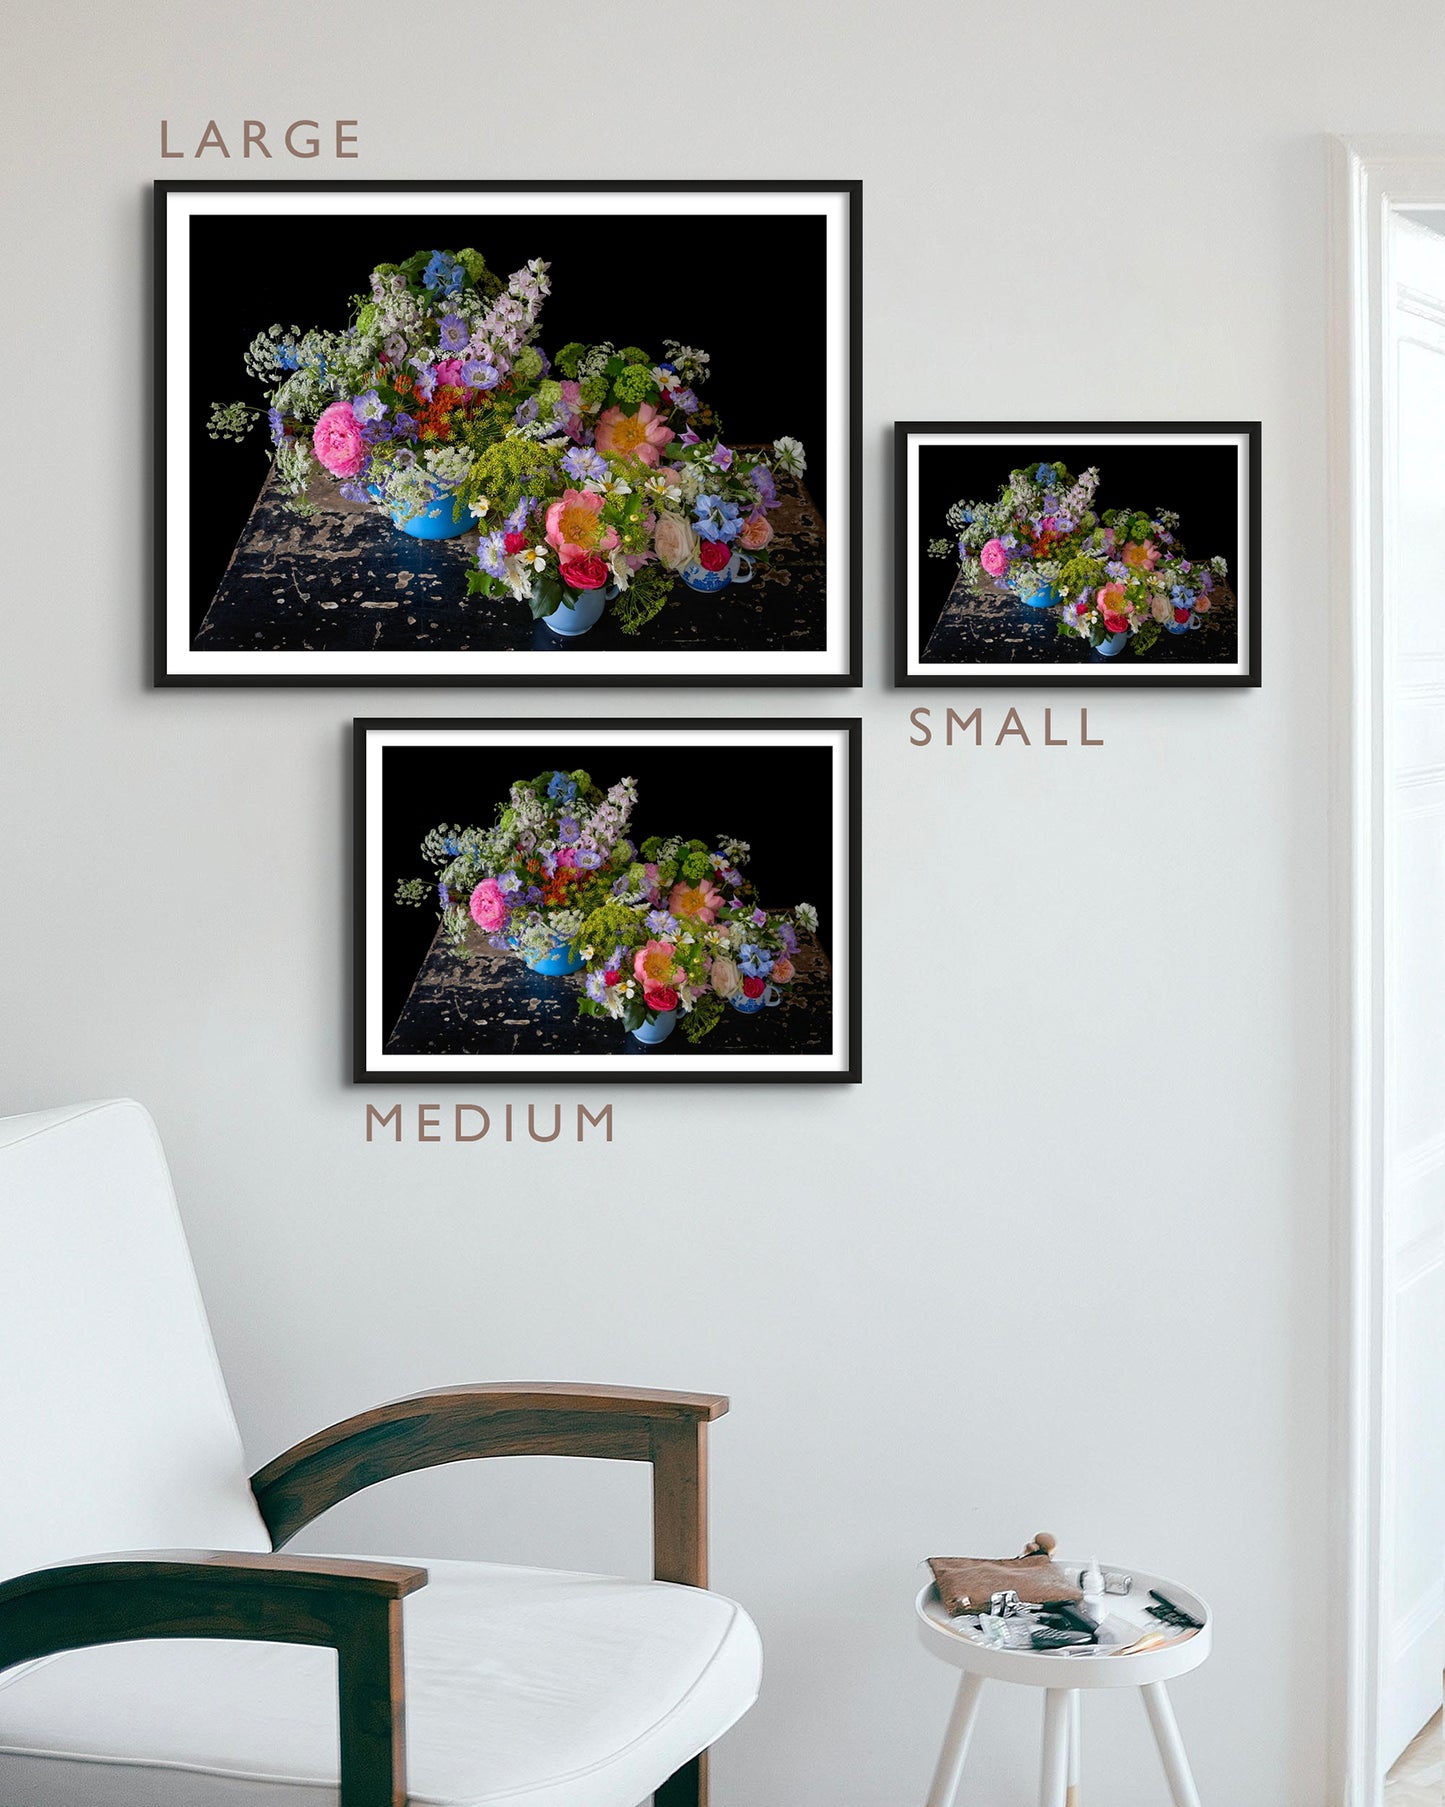 Print Size Guide - Interior picture of Small/Medium/Large 'Dolly' Limited Edition Fine Art Photographic Print Framed & Displayed on a White Wall above an Arm Chair and Side Table.